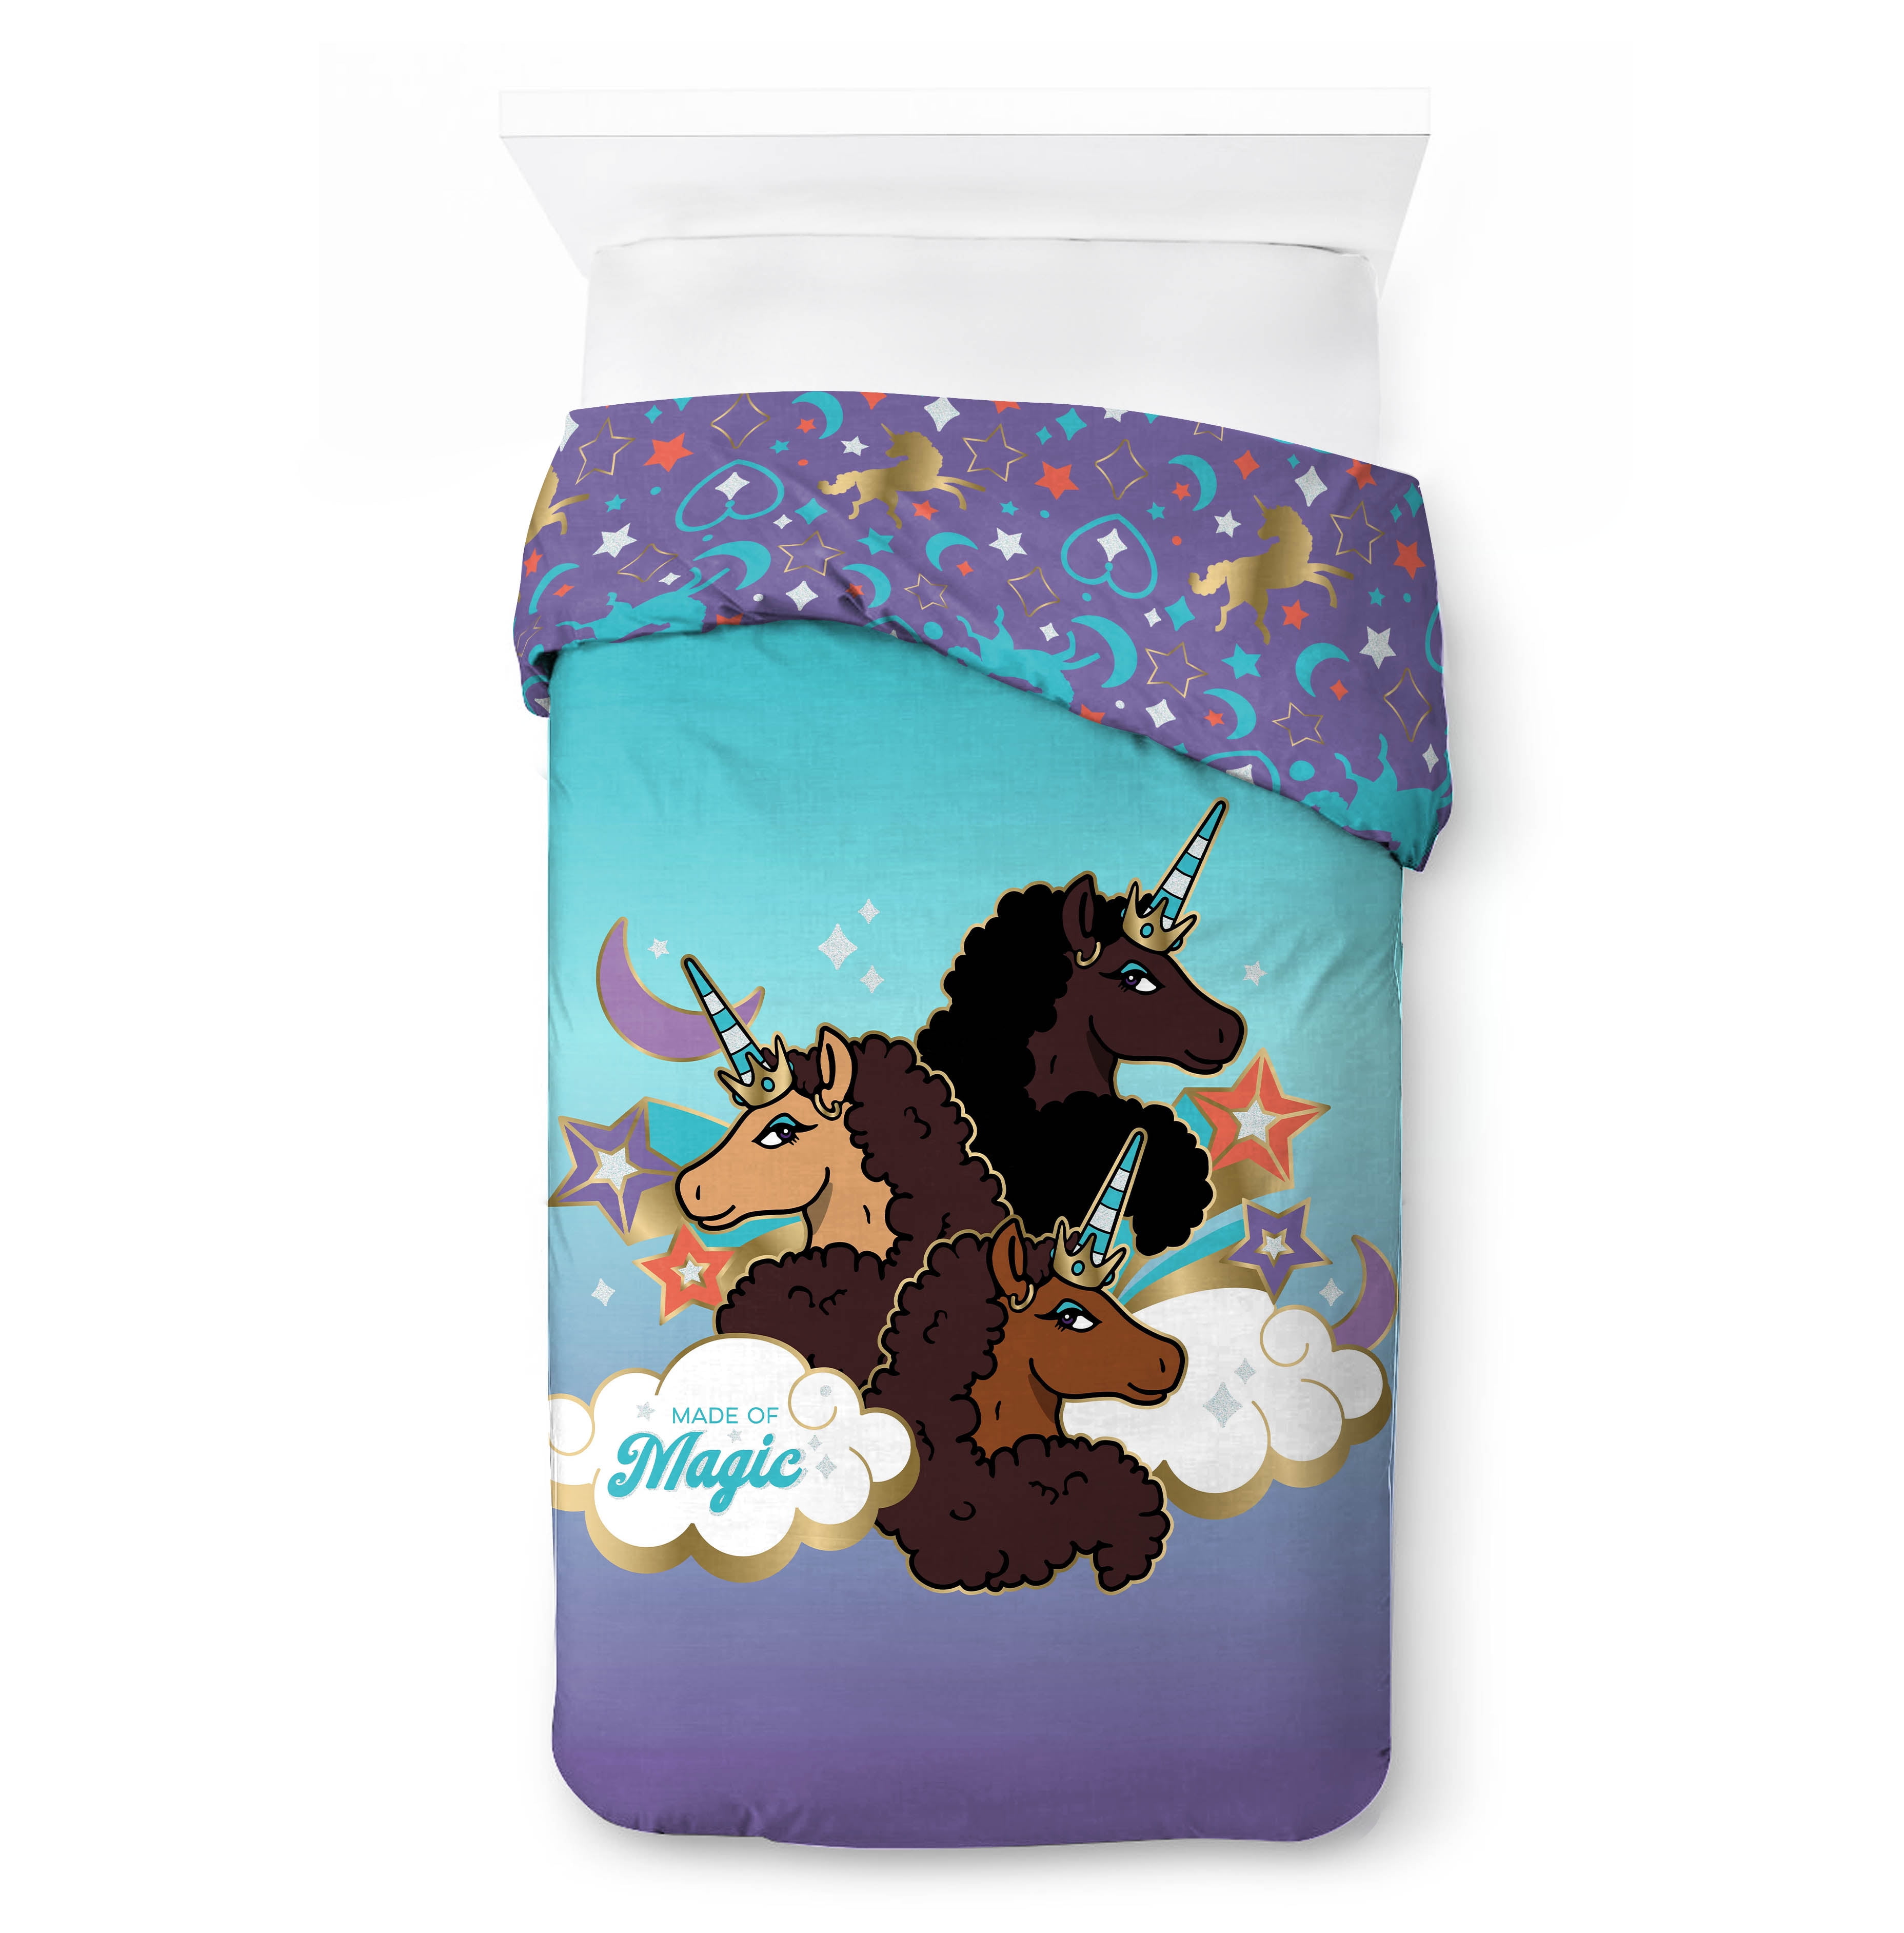 Afro Unicorn Unique, Divine, Magical Throw Blanket - Measures 46 x 60  inches, Kids Bedding - Fade Resistant Super Soft Fleece (Official Product)